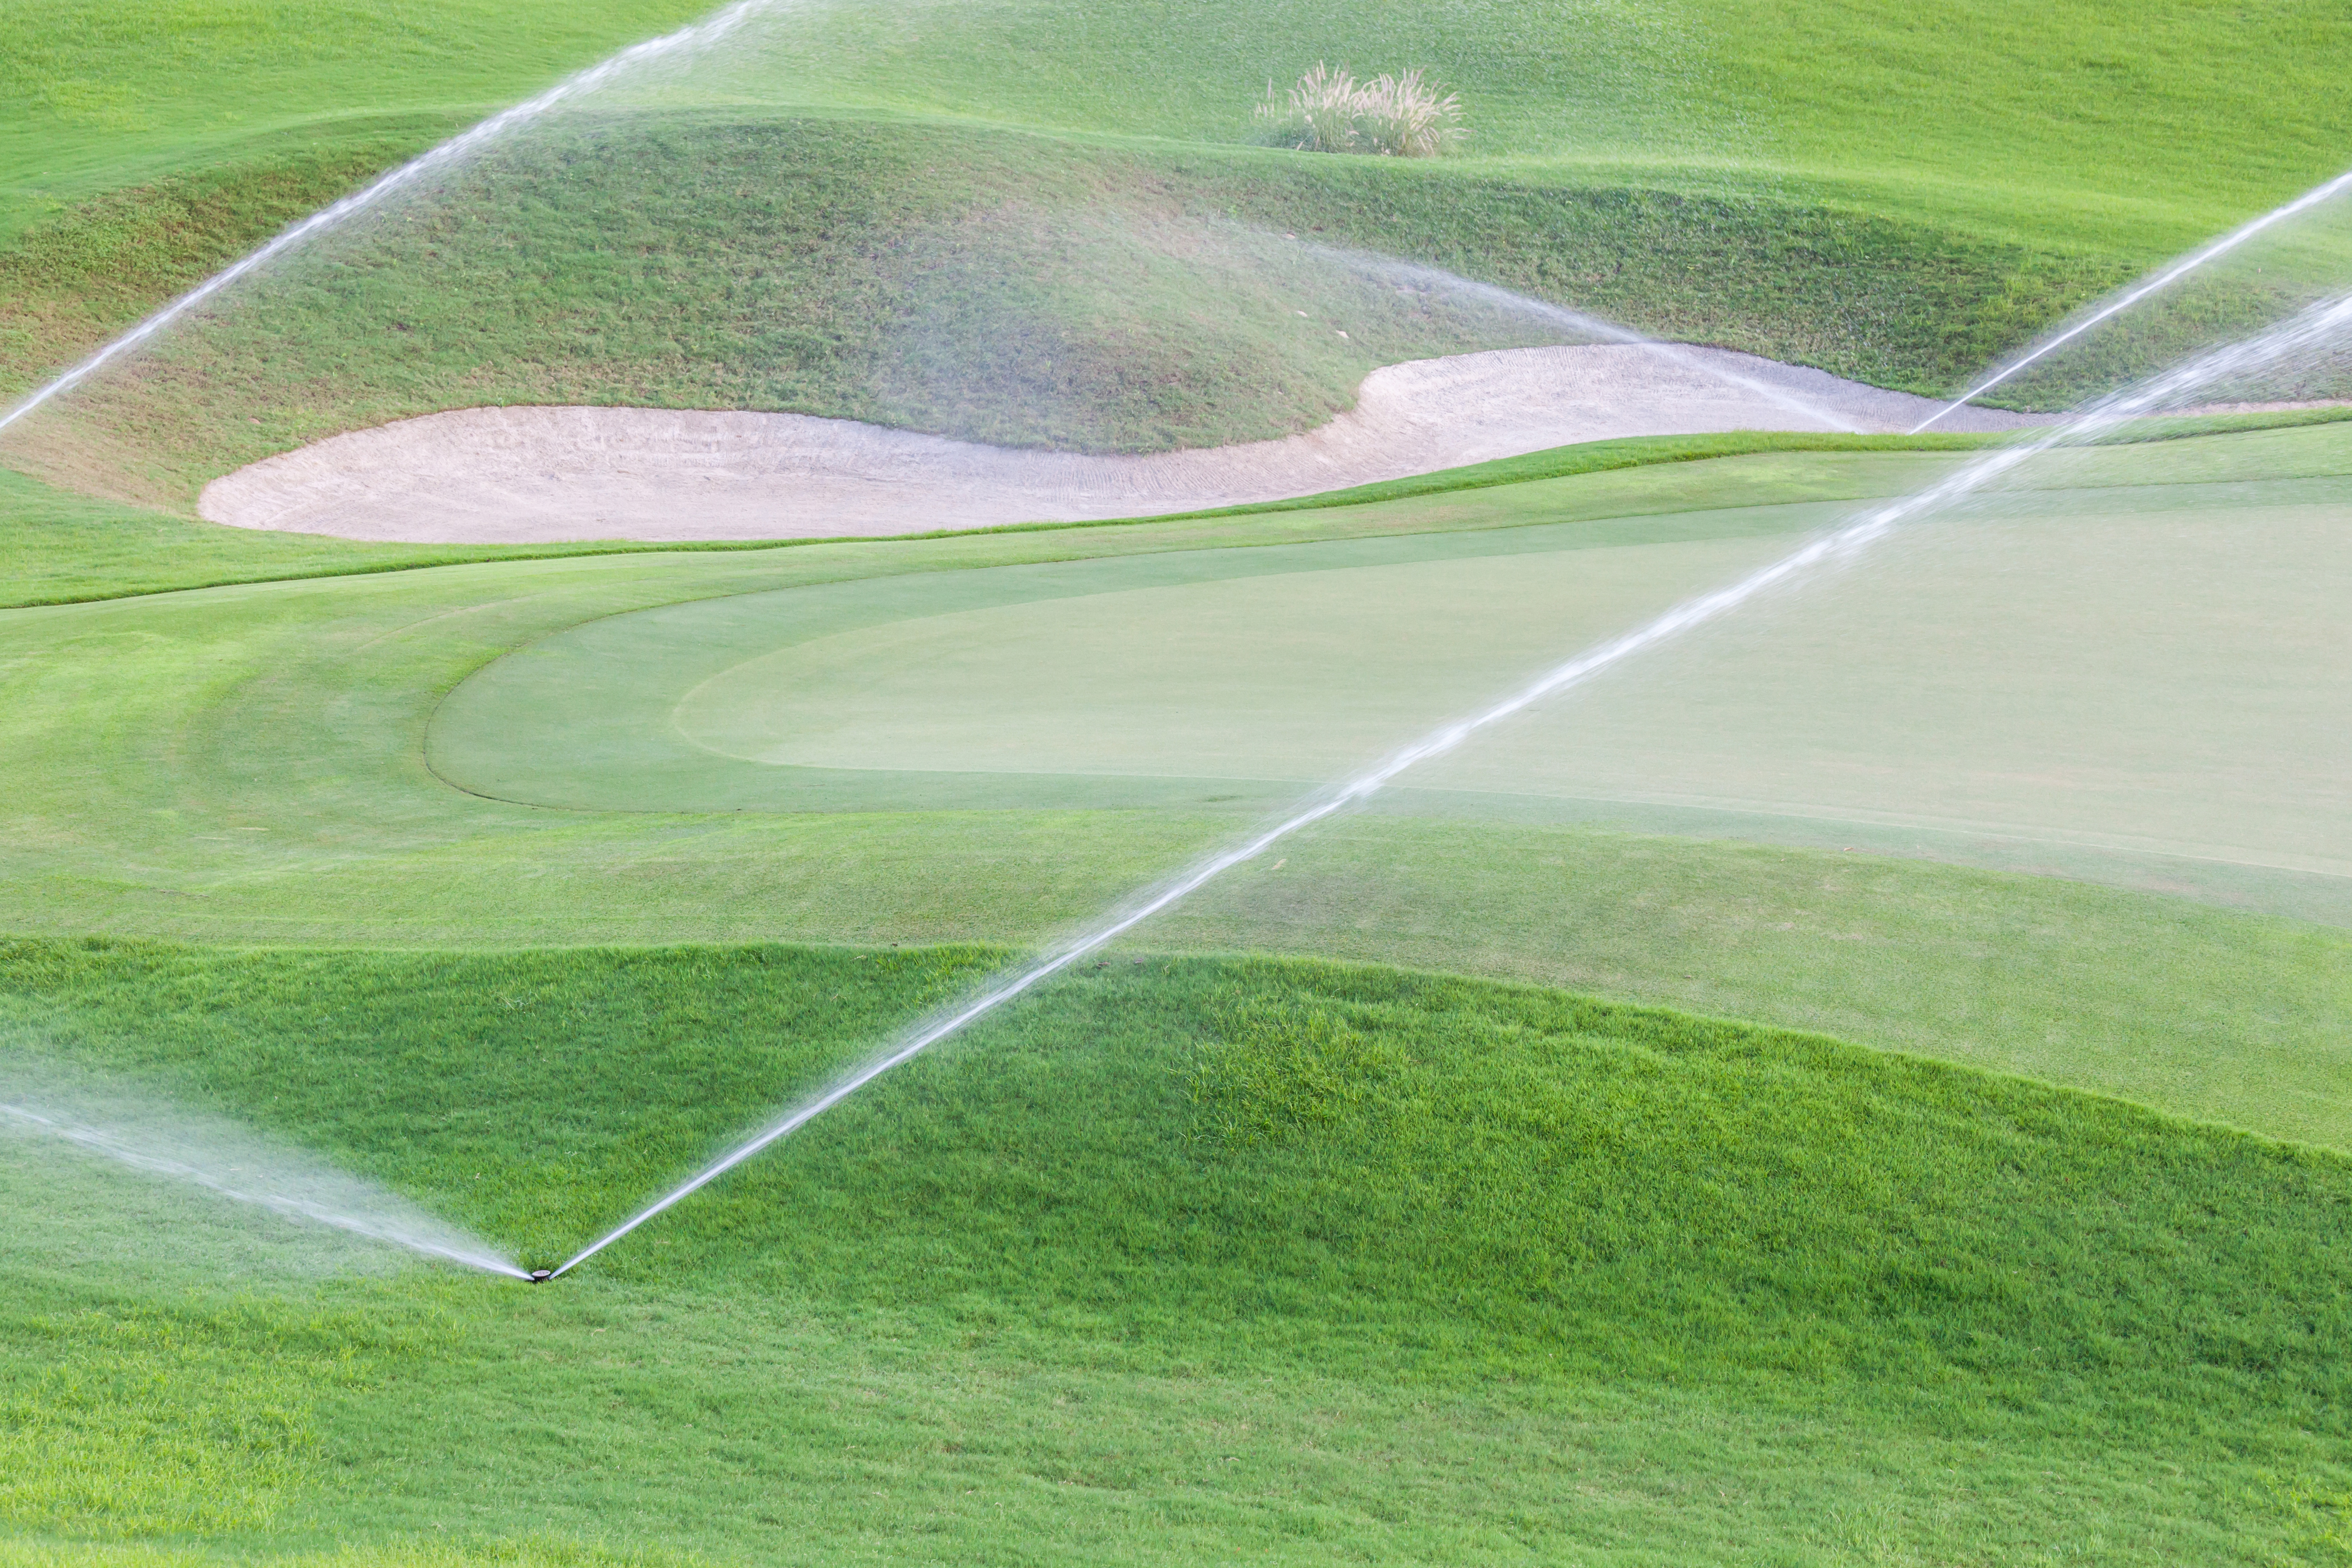 The Markets Corner: Water. Sprinklers irrigate the green grass around a golf course sand trap.